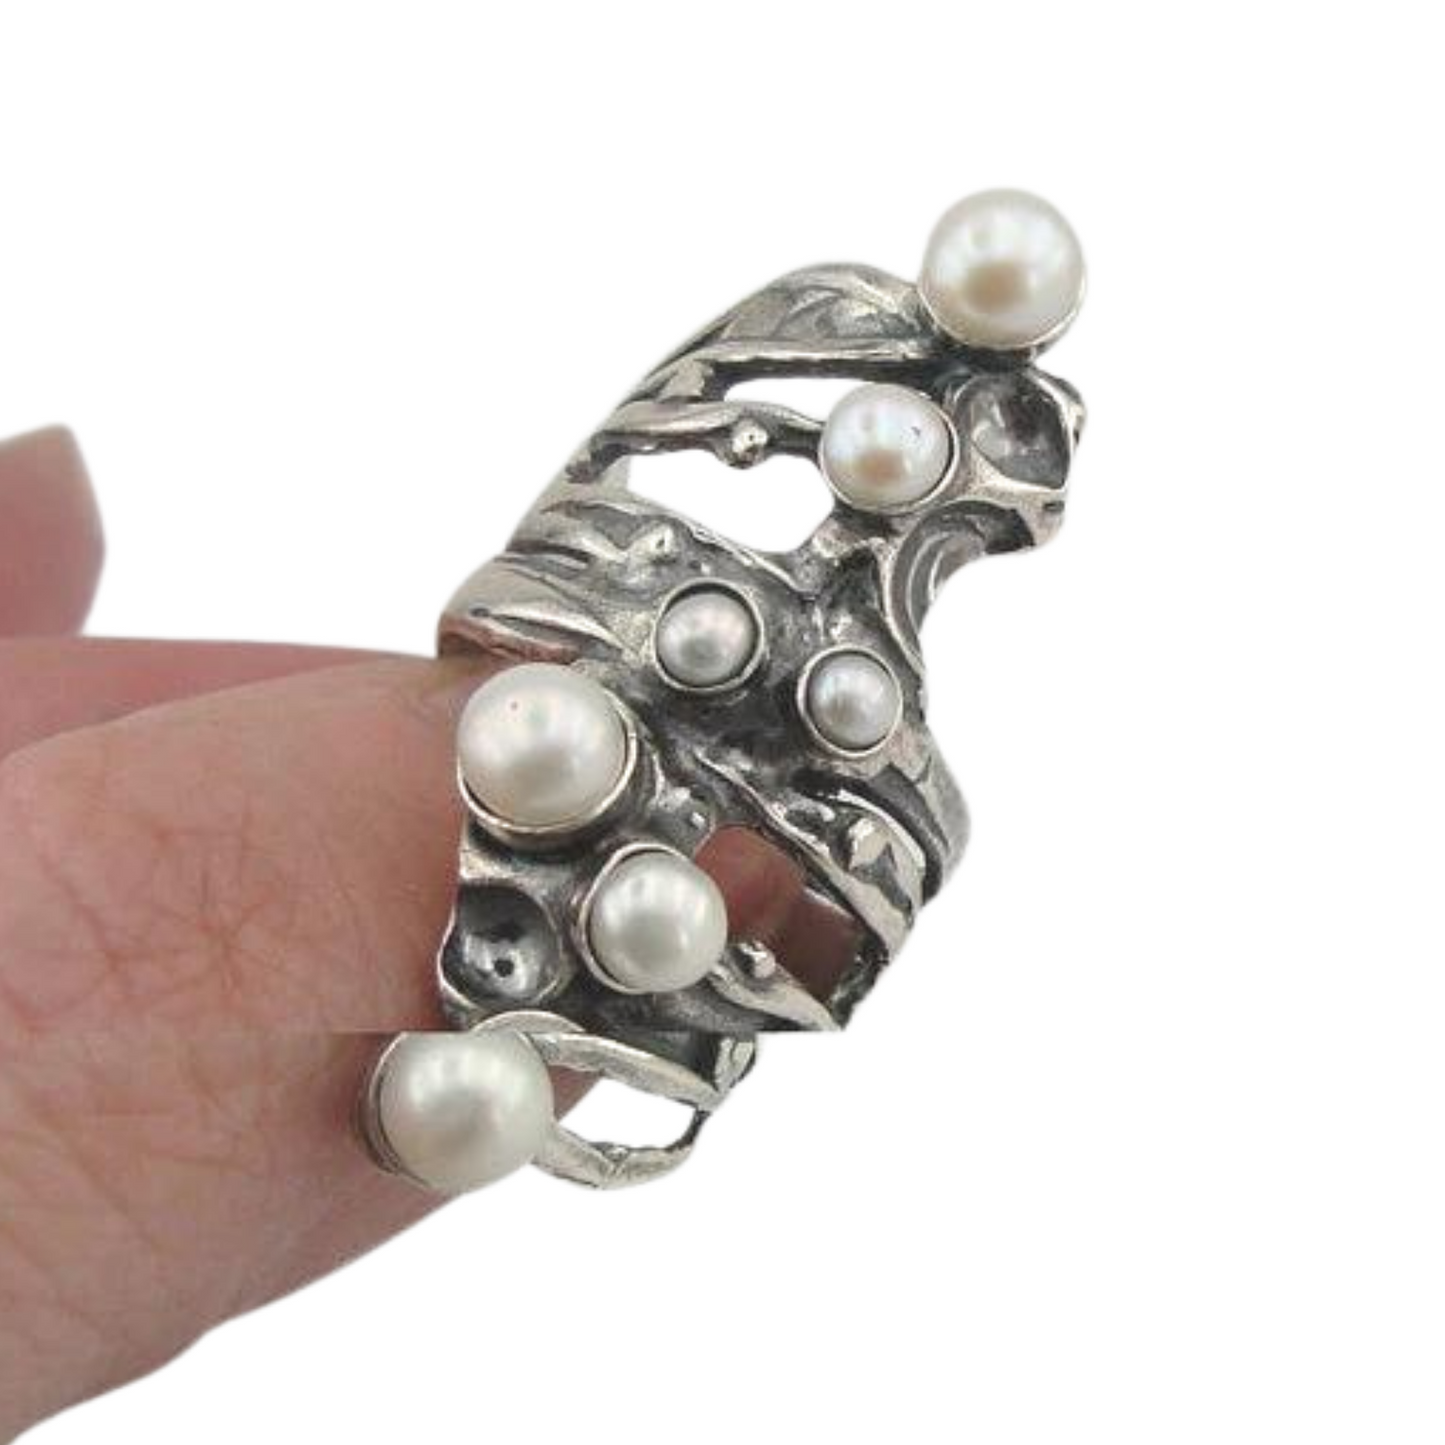 Long Sterling Silver Ring with Fresh Water Natural White Pearls, is a high-quality sterling silver massive ring.